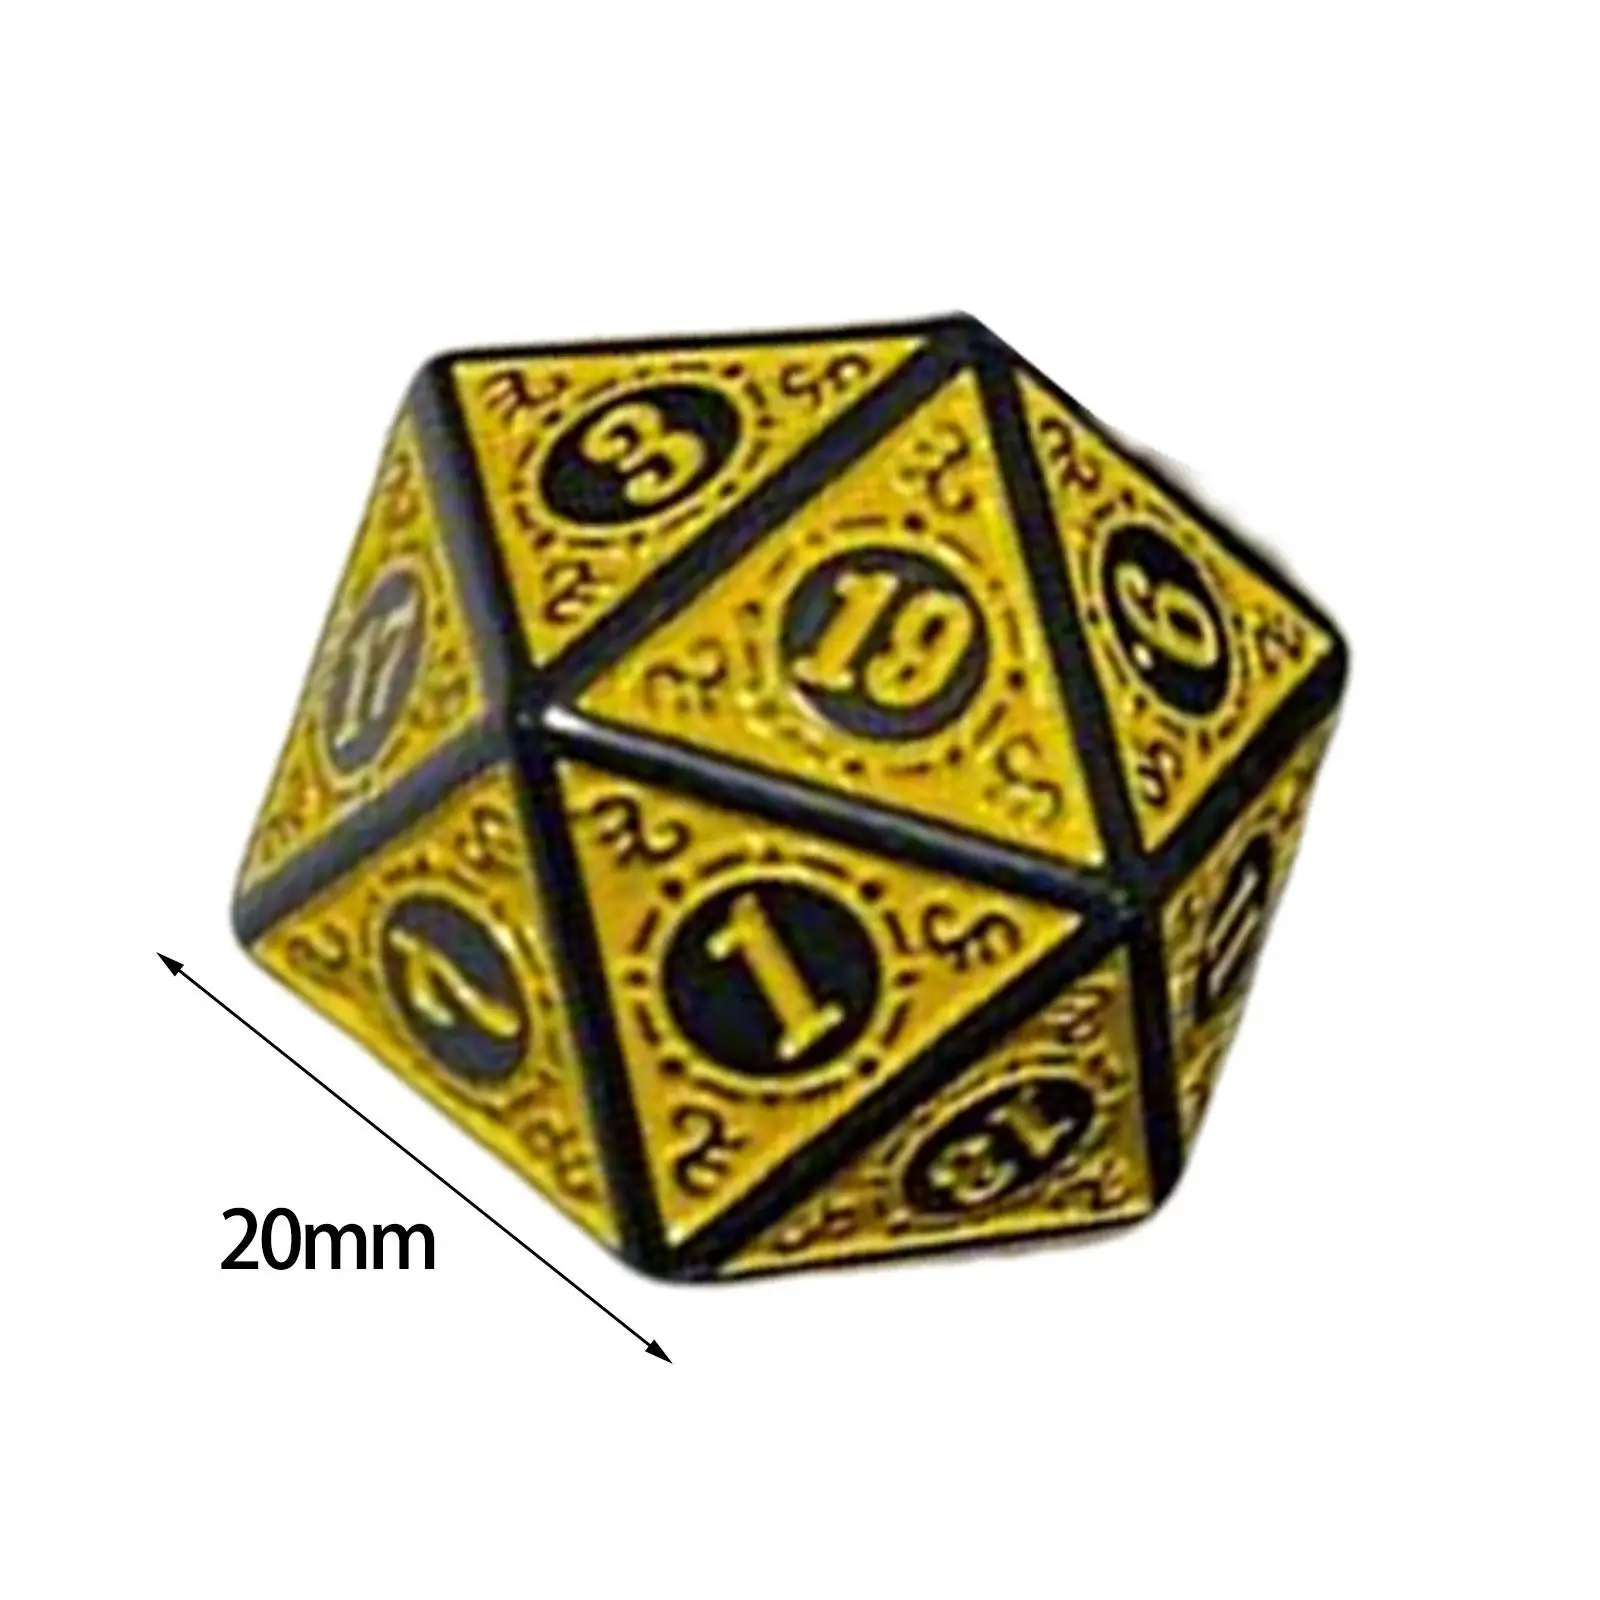 20x Polyhedral Dices Set Entertainment Toys Party Favors Acrylic Dices Dices Games D20 Dices Set for Party KTV Bar Board Game